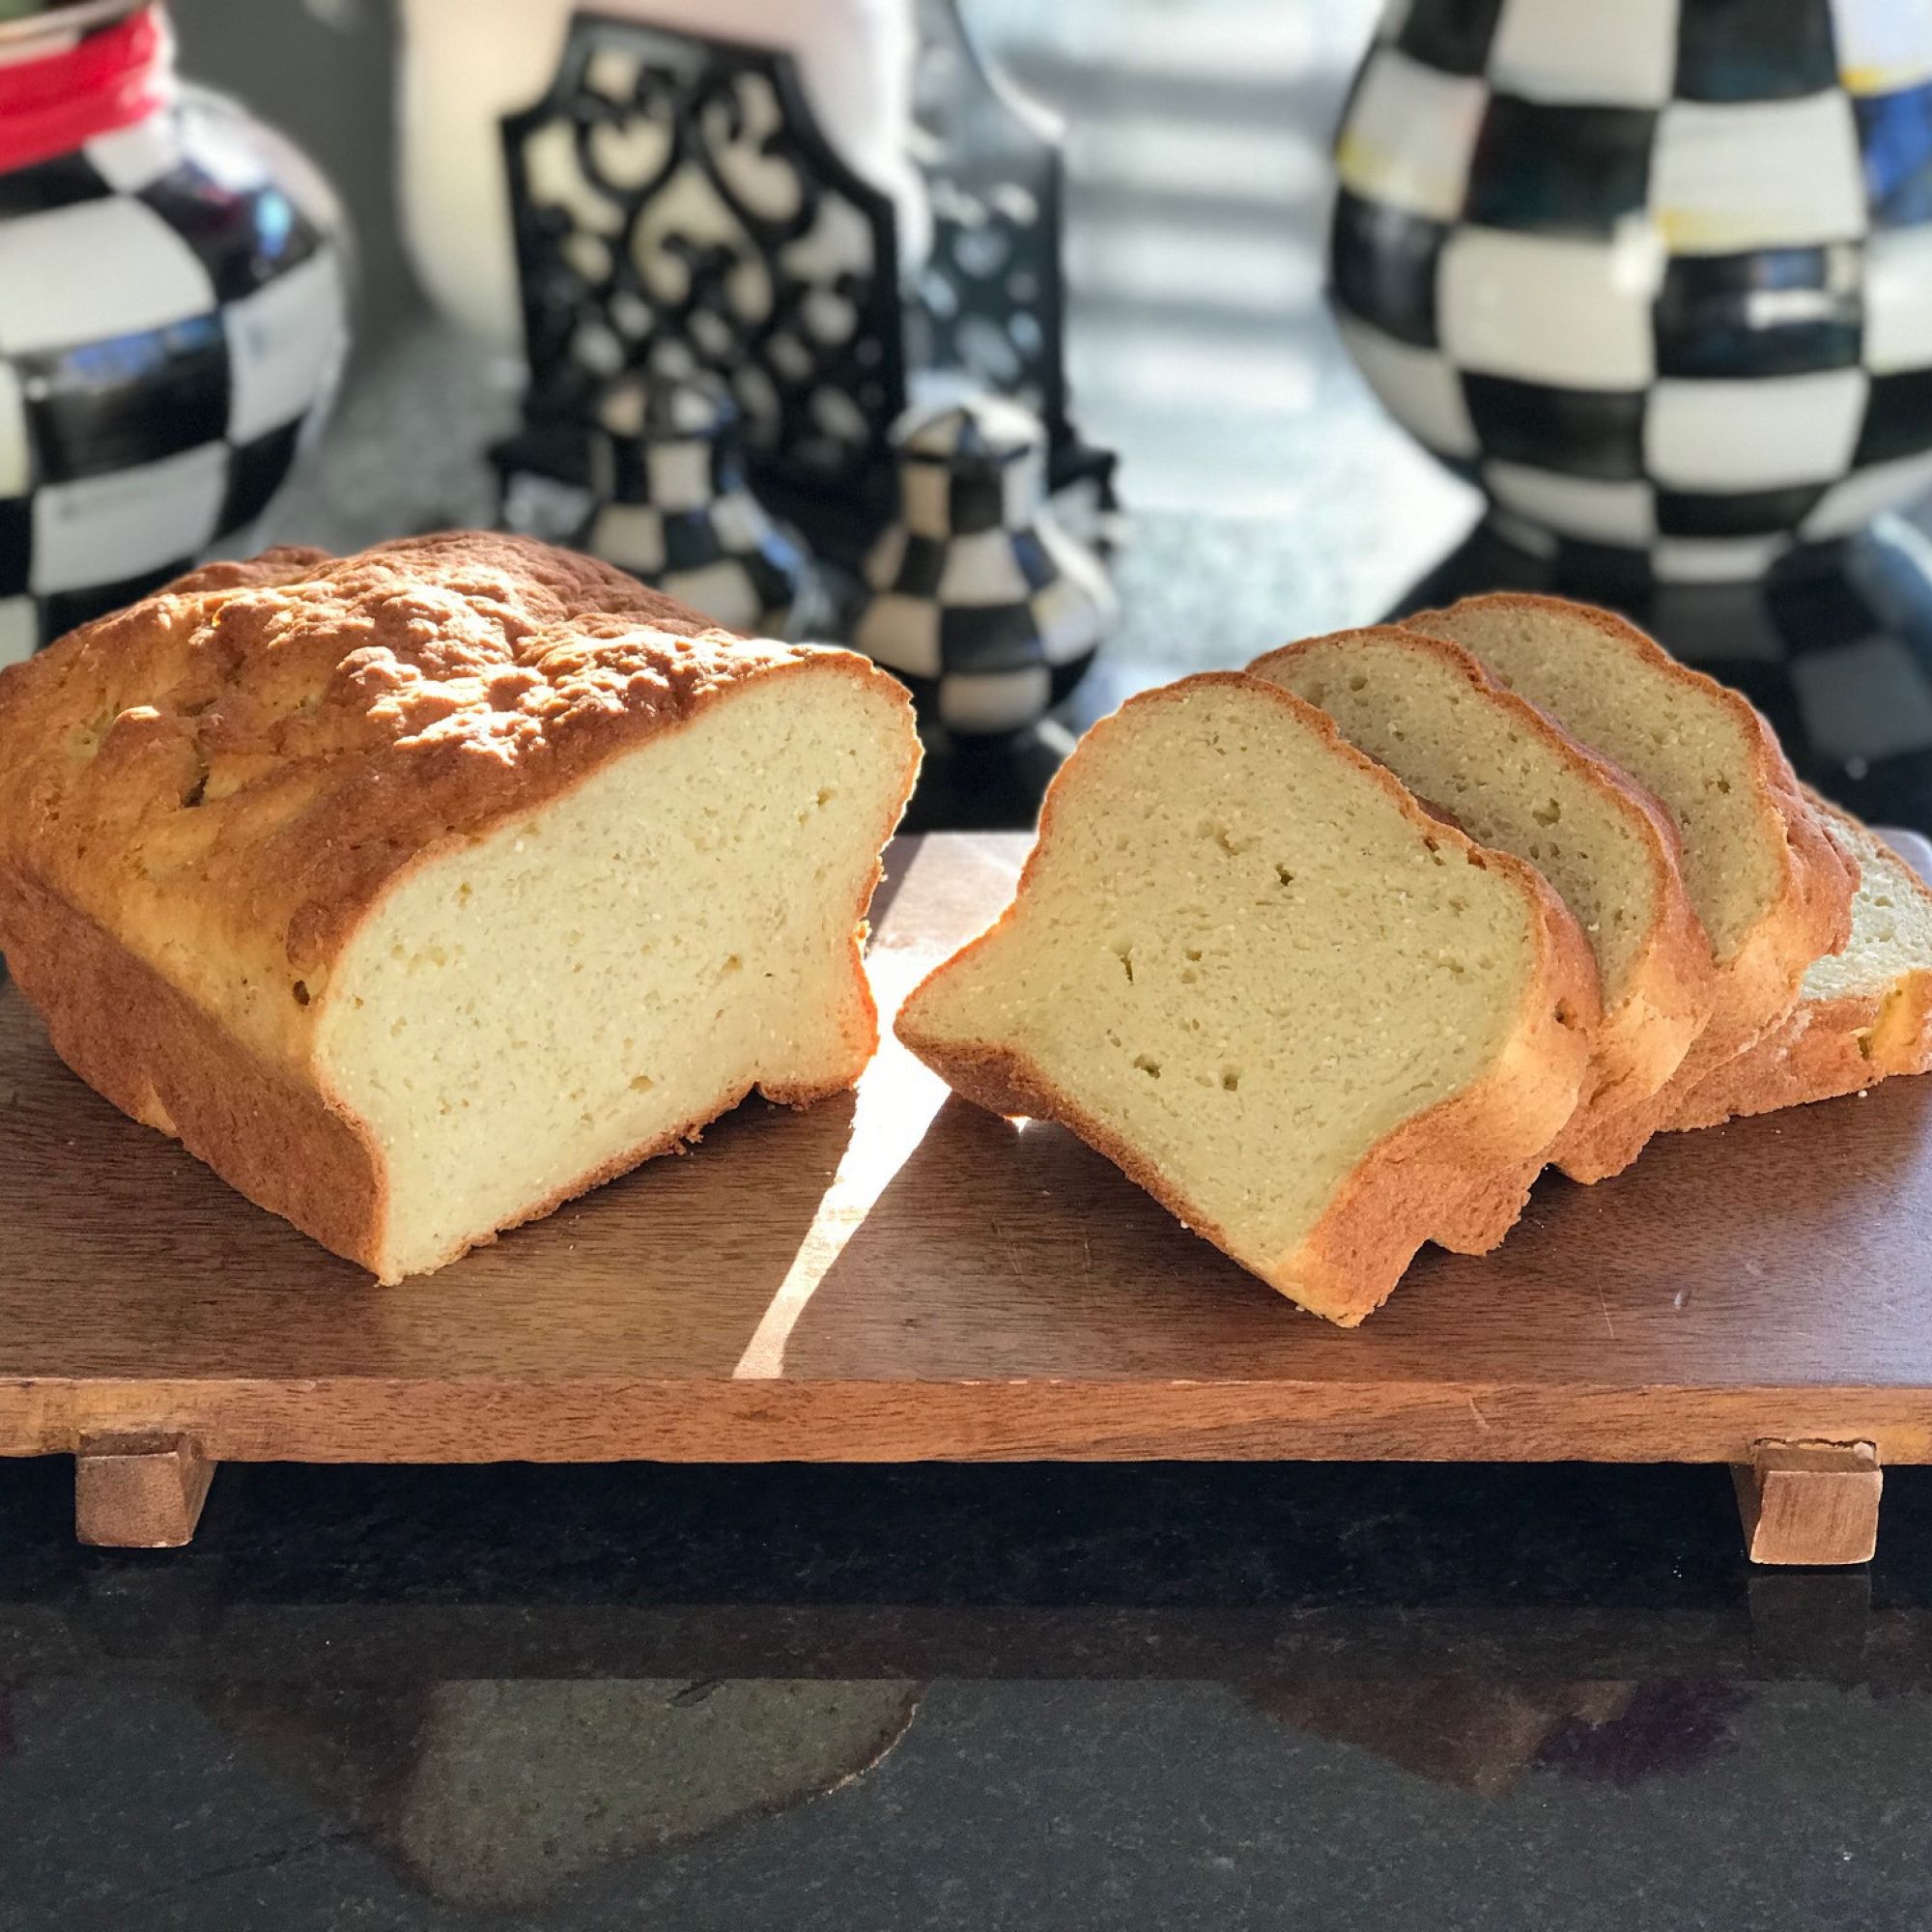 Gluted free bread